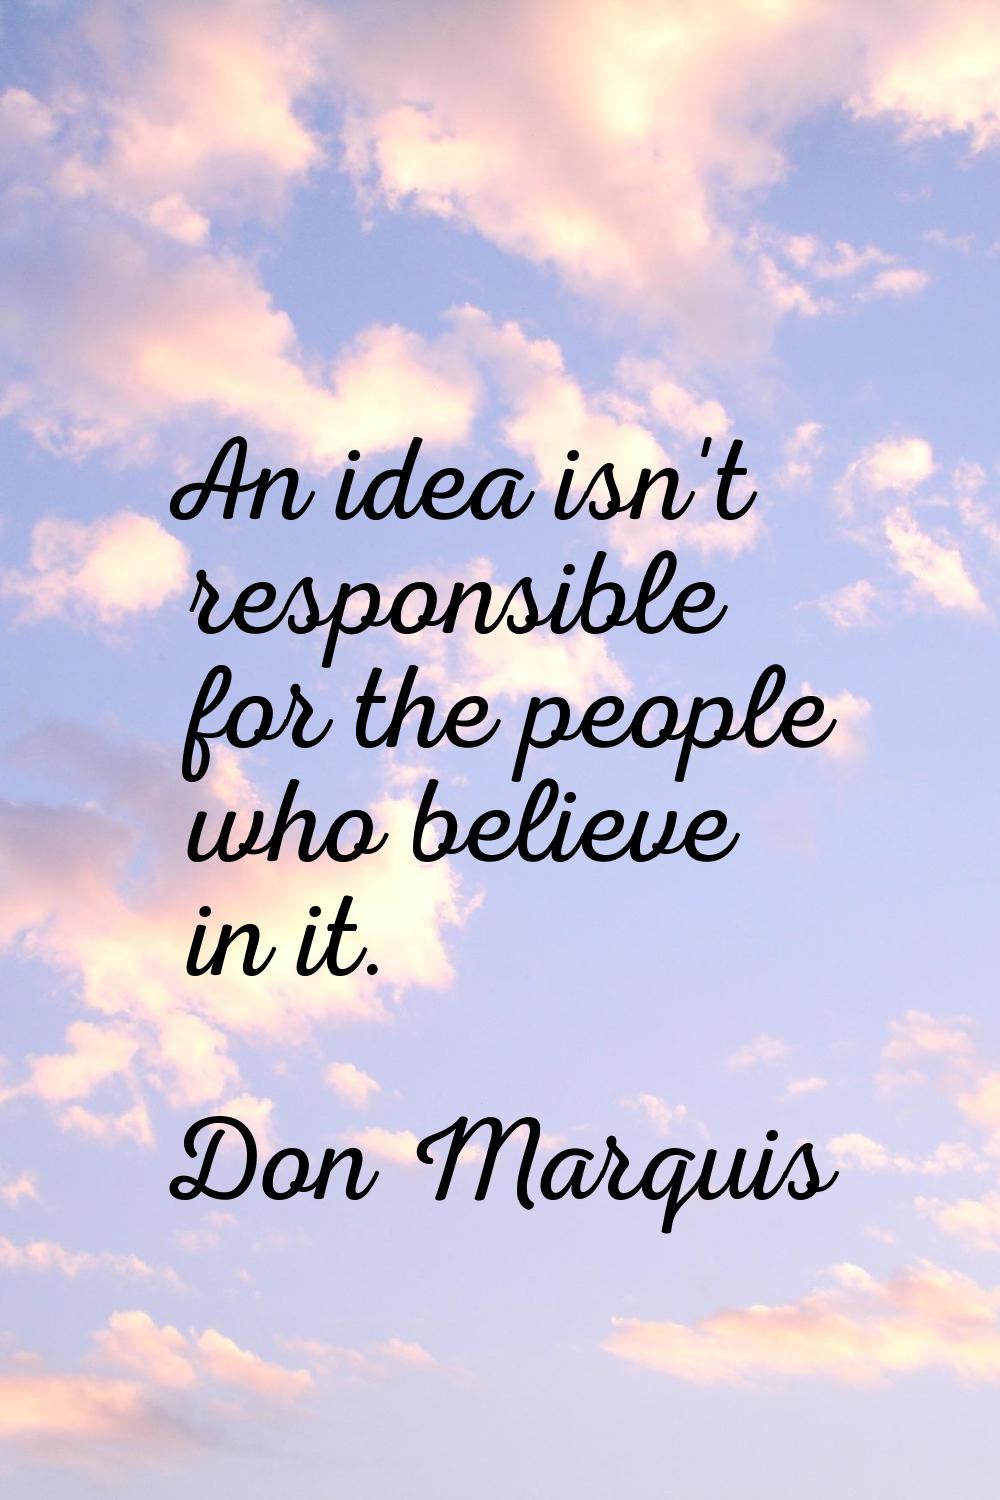 An idea isn't responsible for the people who believe in it.